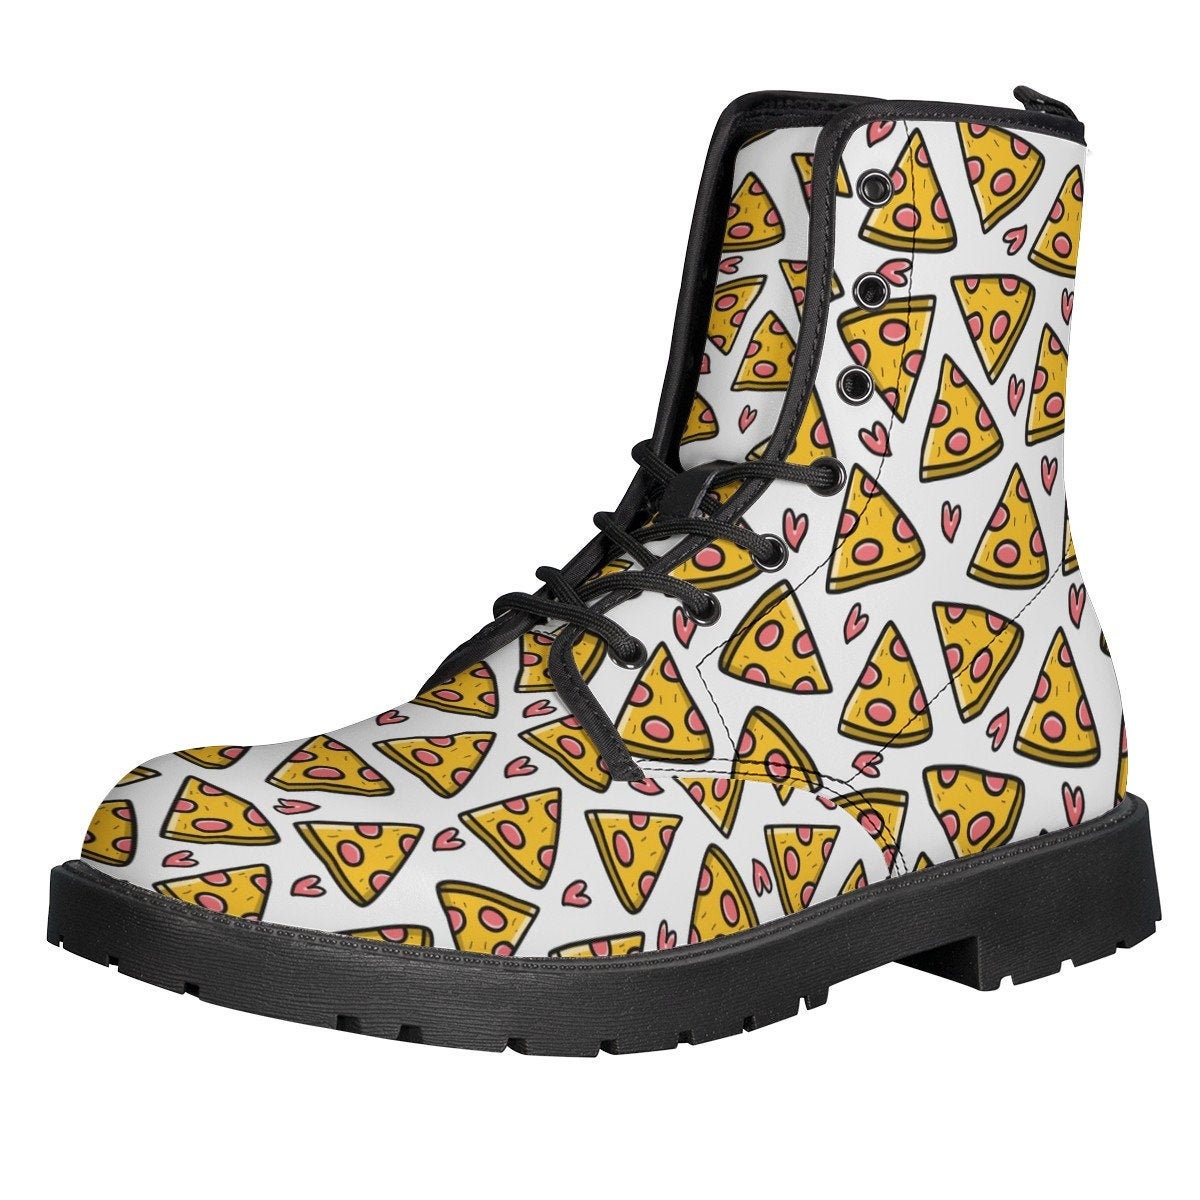 Pizza Boots, Kawaii Leather Boots, Handcrafted Boots, Women Girl Gift, Classic Boot, Pizza Pattern